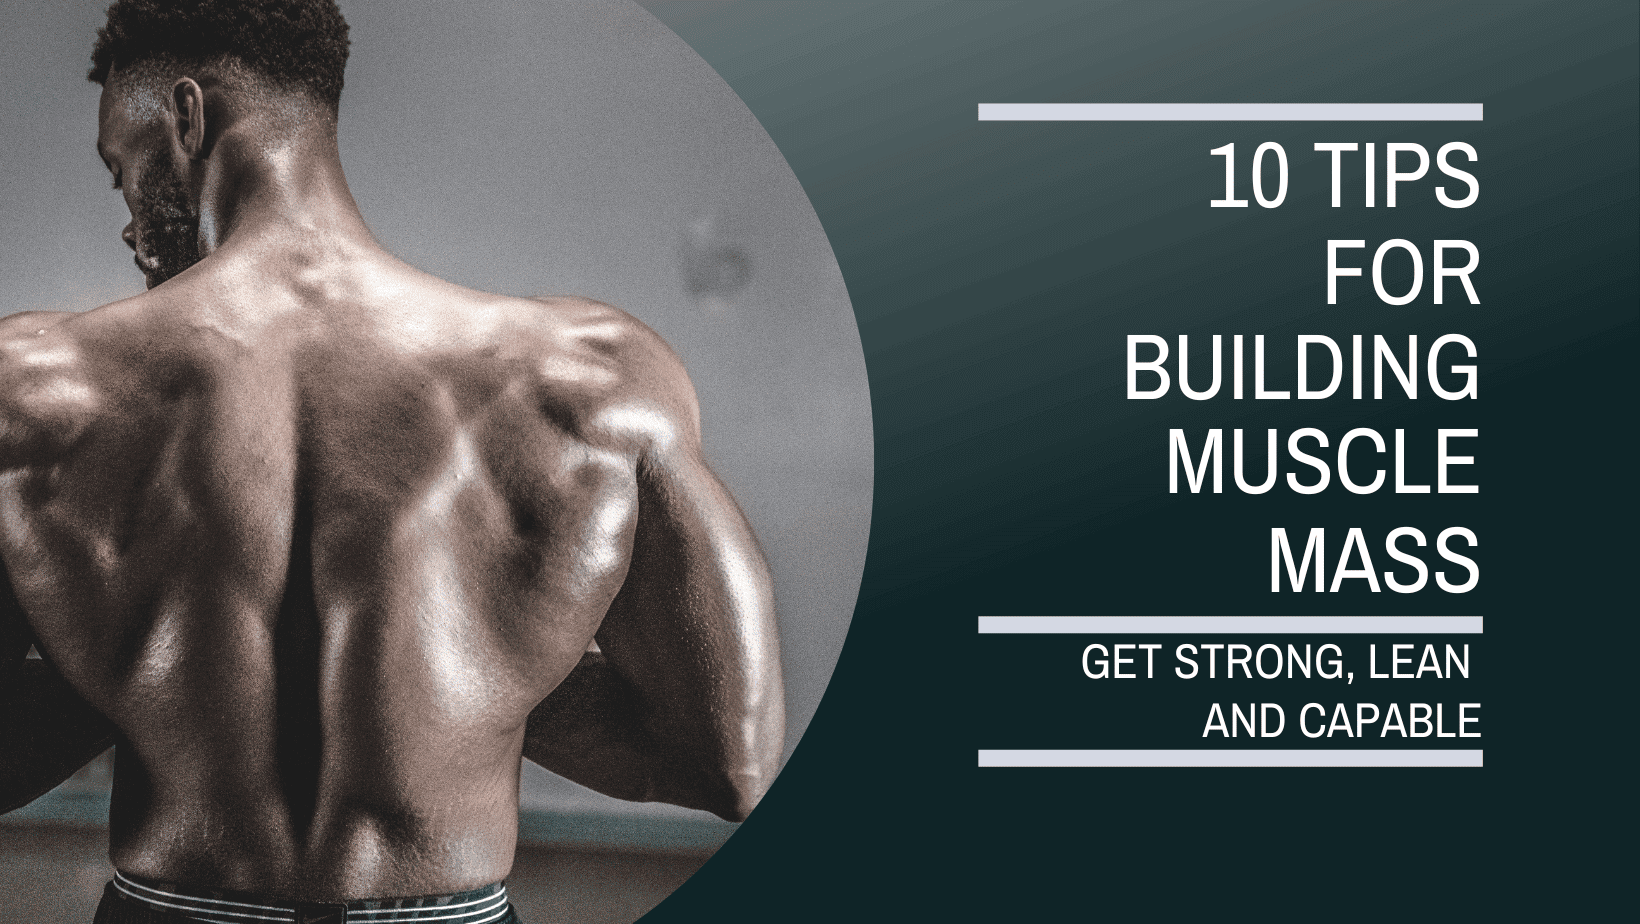 Muscle building tips